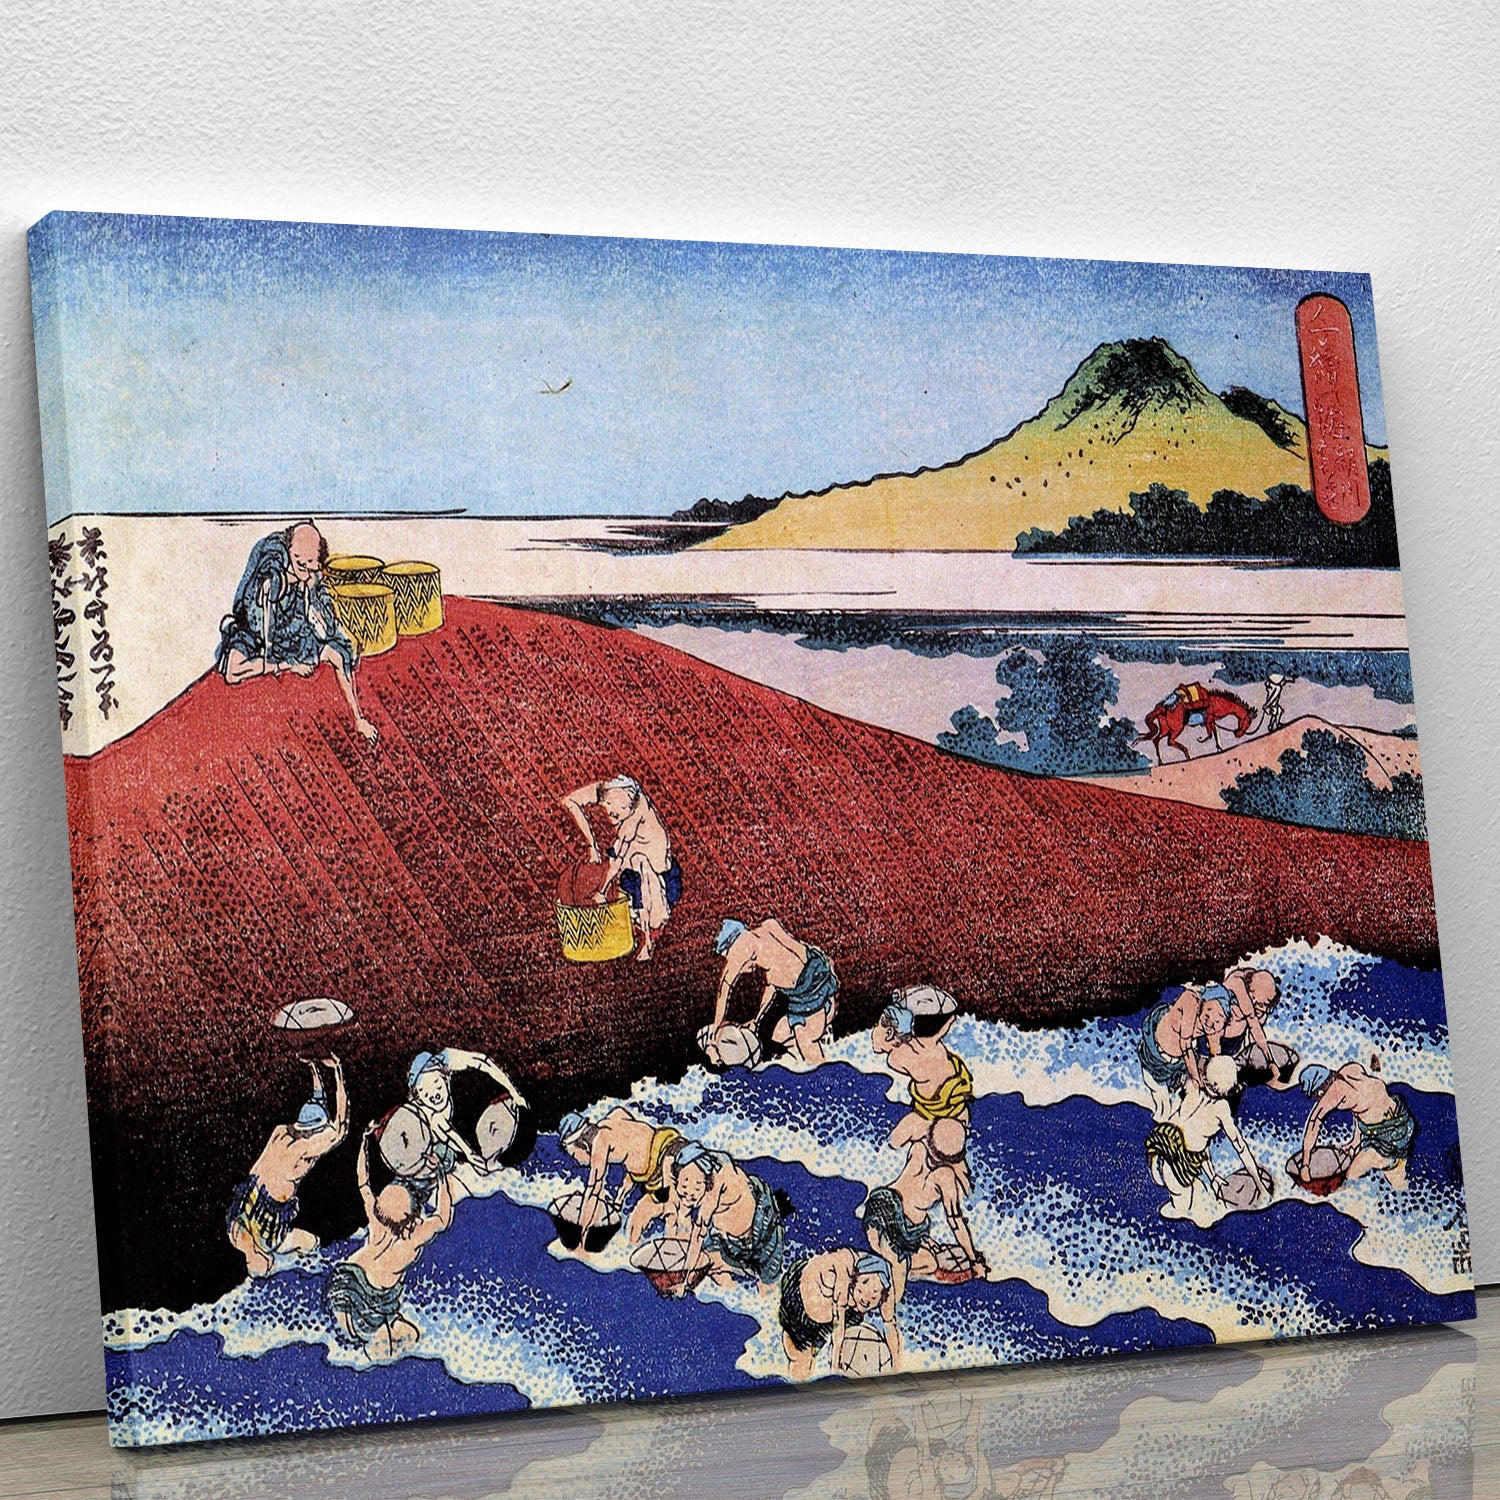 Ocean landscape with fishermen by Hokusai Canvas Print or Poster - Canvas Art Rocks - 1